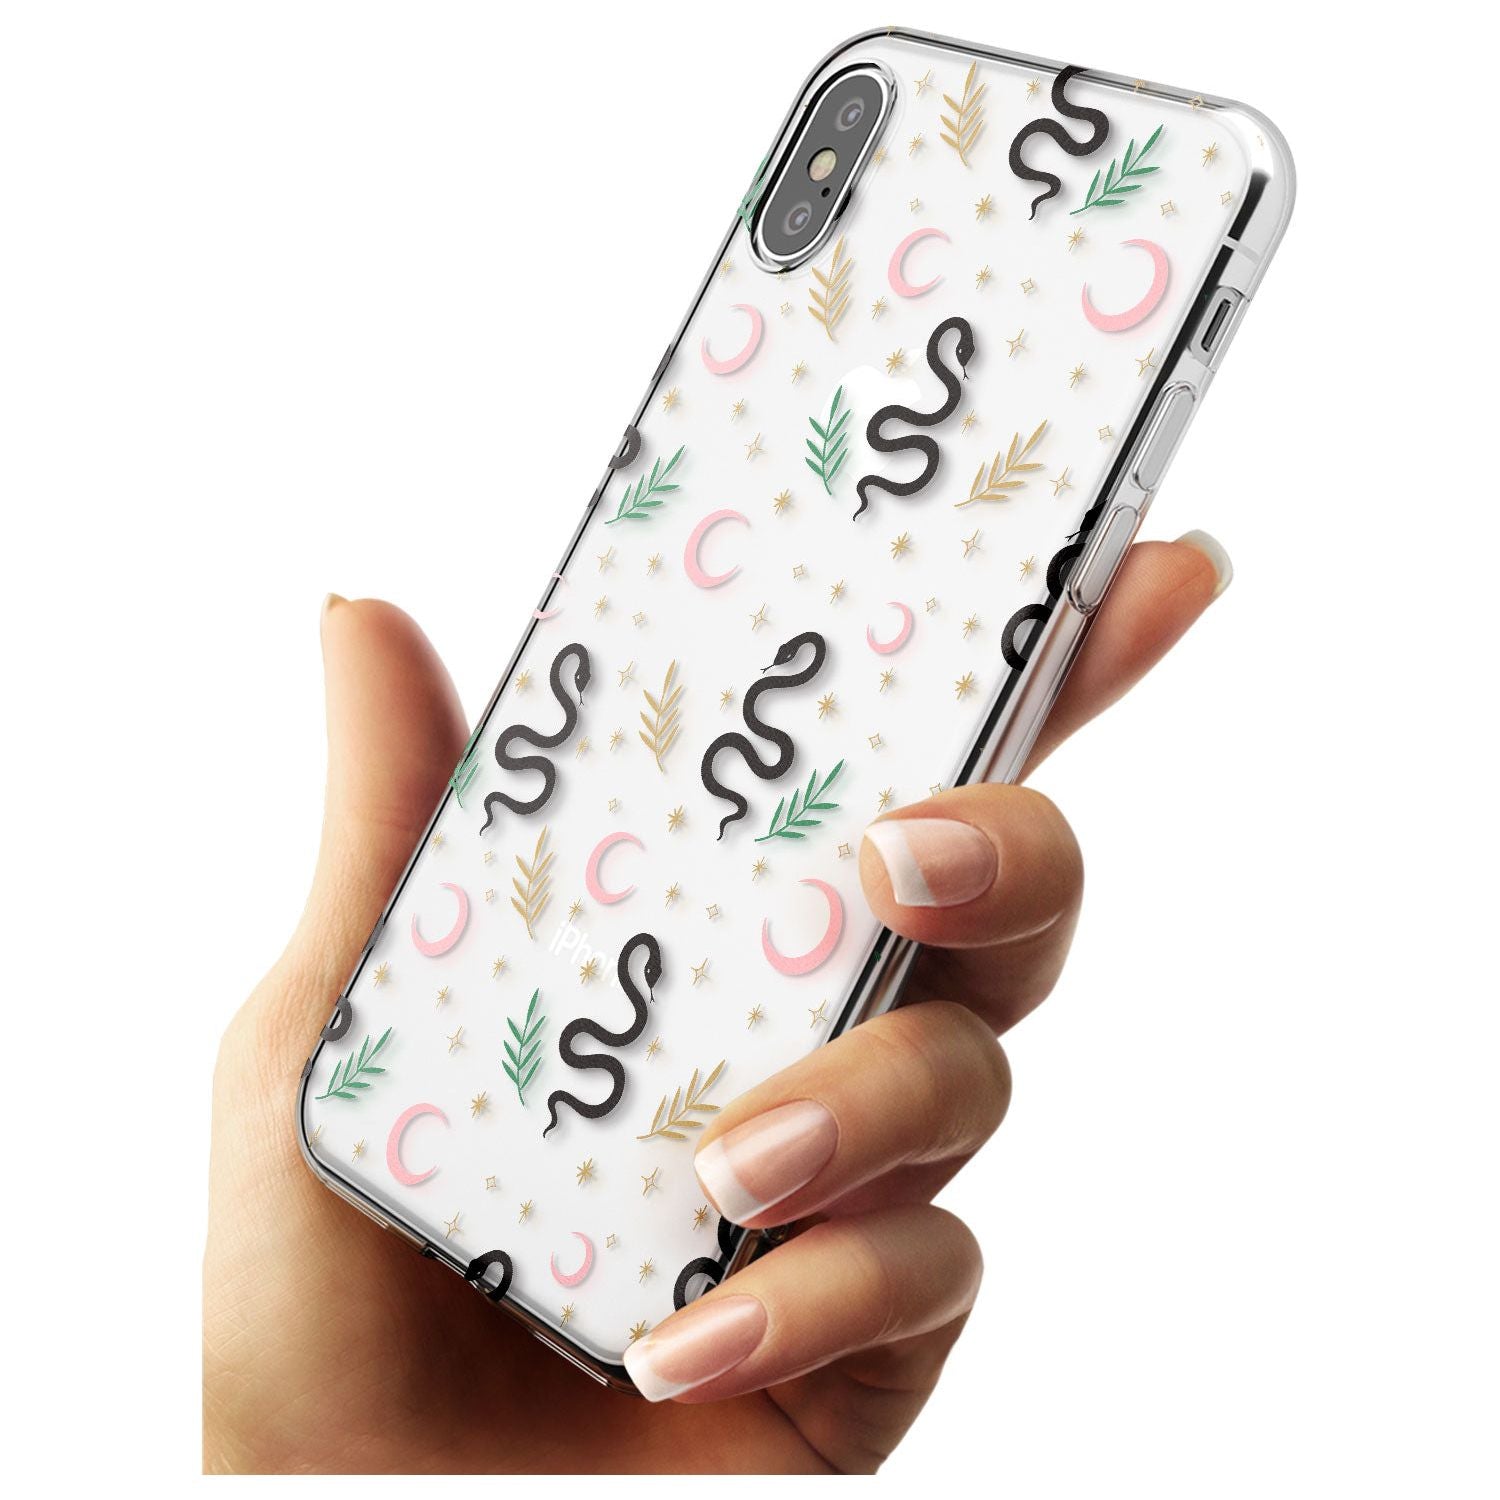 Snake & Moon Pattern (Clear) Black Impact Phone Case for iPhone X XS Max XR